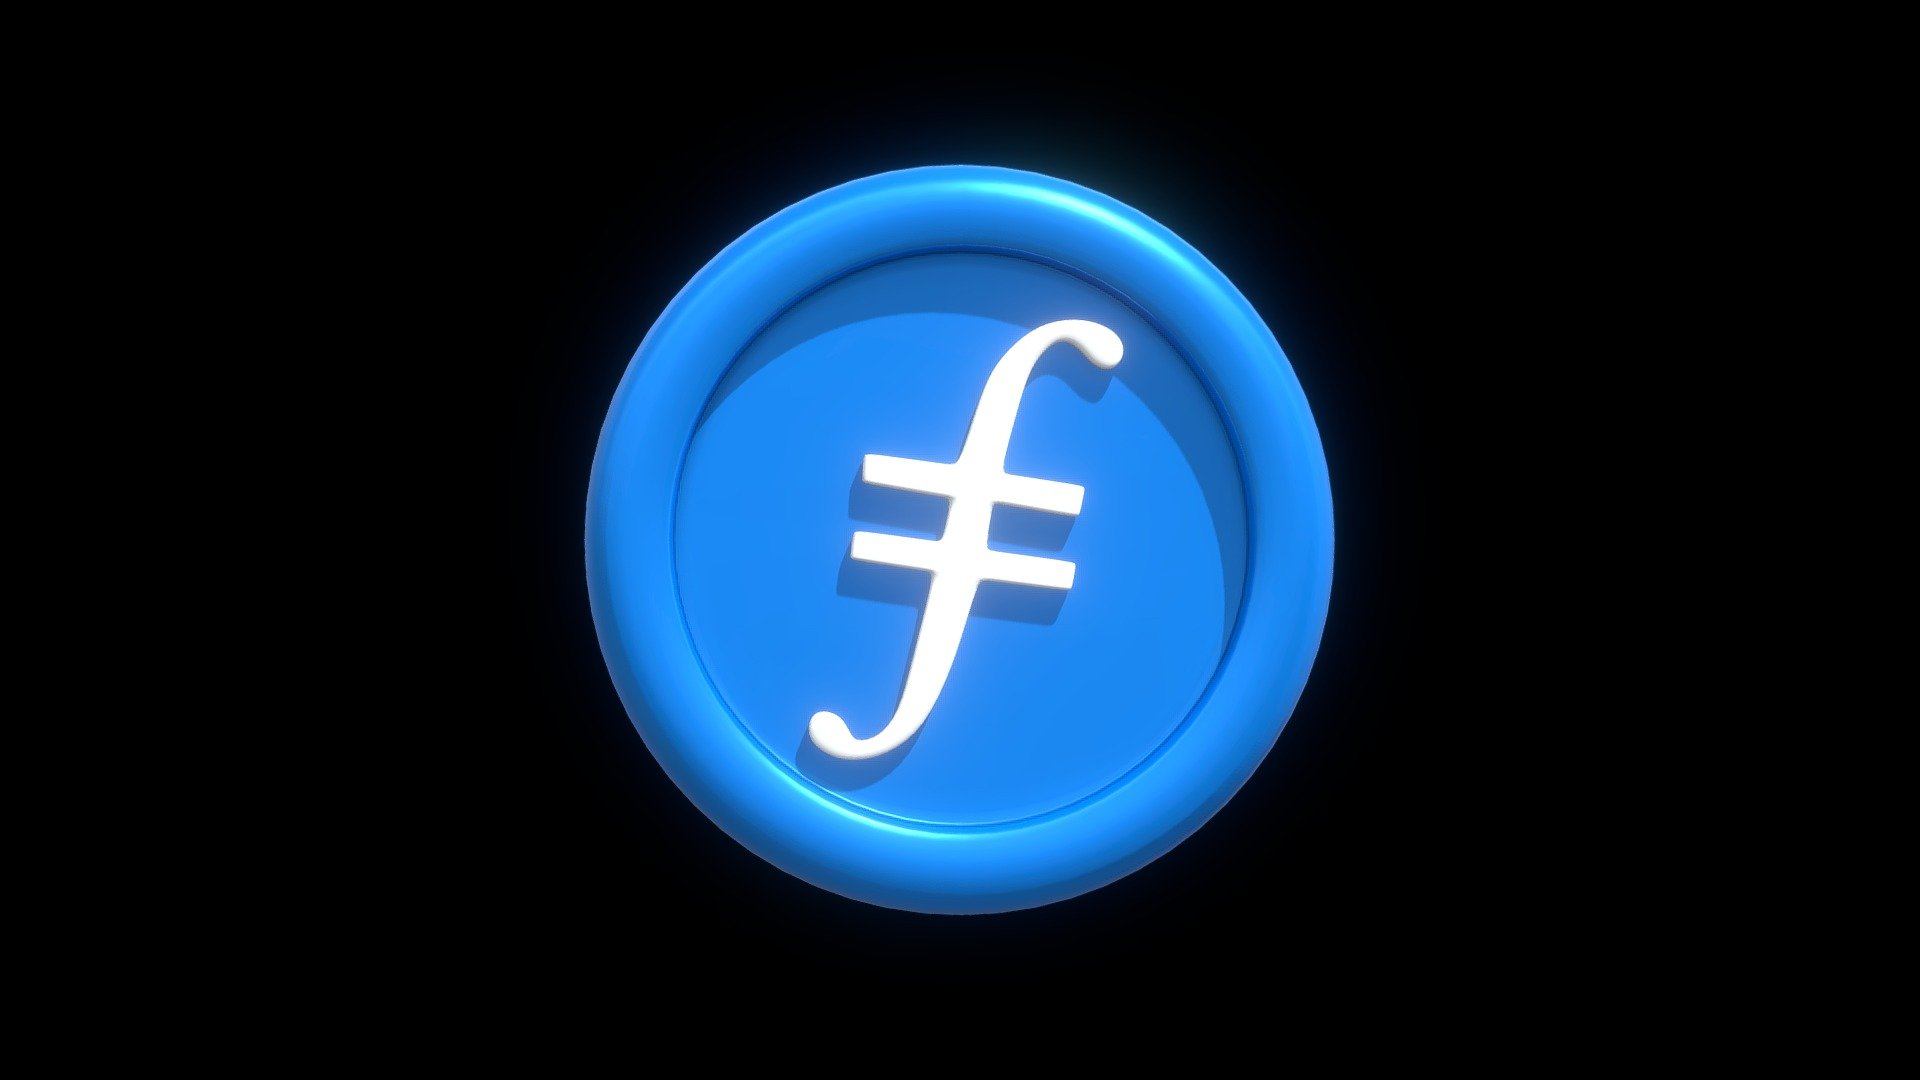 3D Filecoin or FIL Blue Crypto Coin with cartoon style Made in Blender 3.3.1

This model does include a TEXTURE, DIFFUSE, METALLIC, AND ROUGHNESS MAP, but if you want to change the color you can change it in the blend file, just use the principled bsdf and play with the Roughness, Metallic, and Base Color parameter 3d model